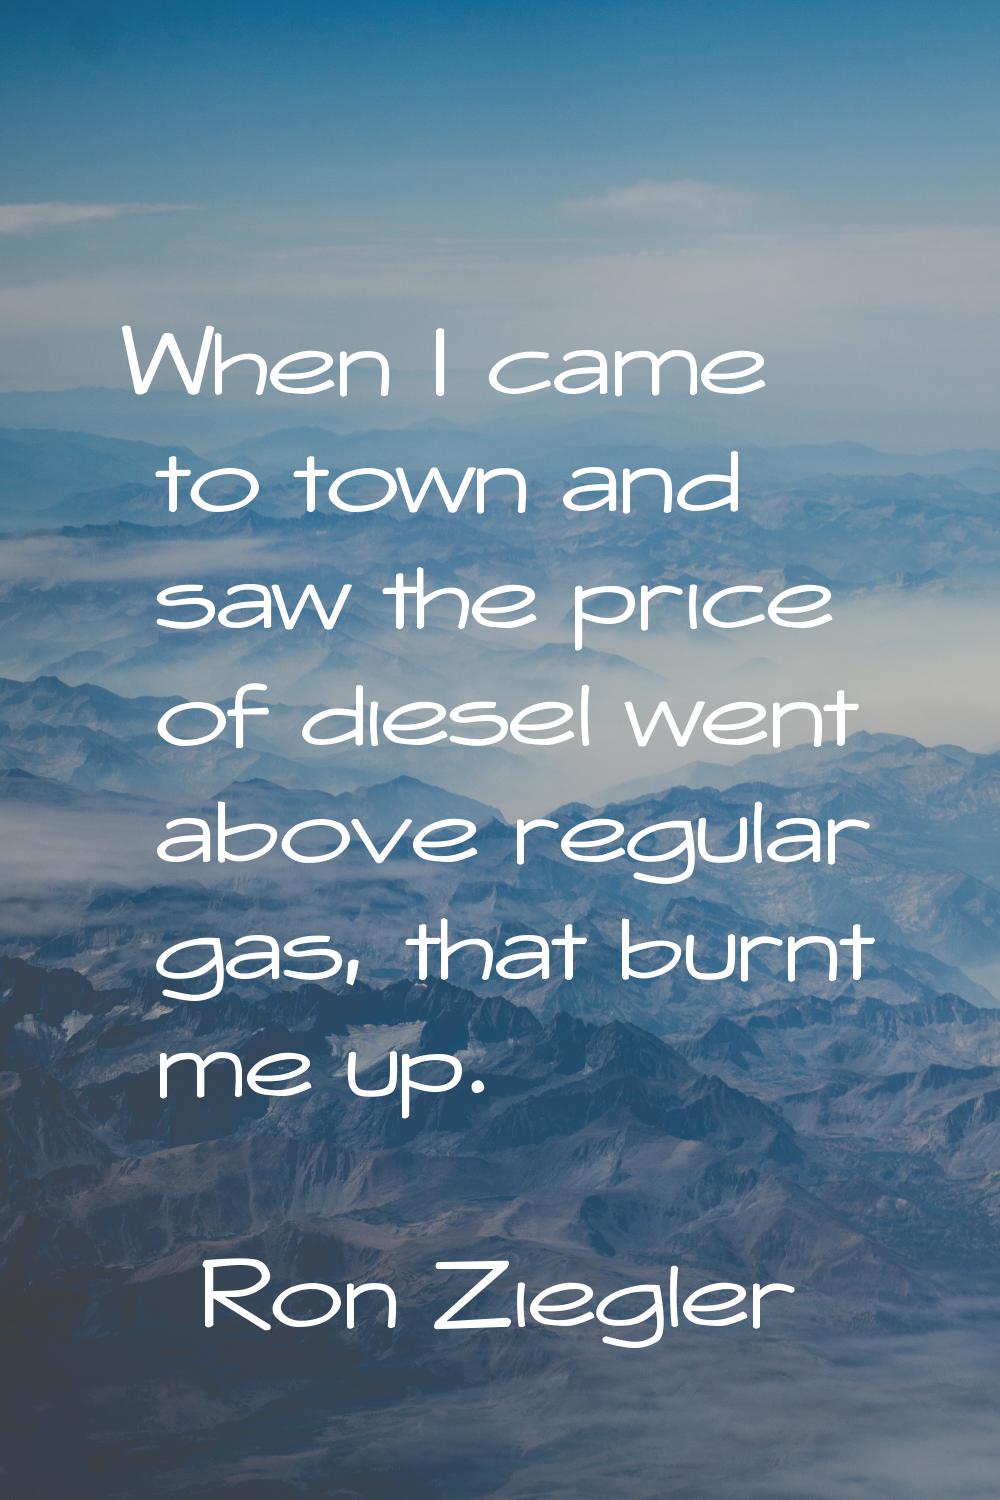 When I came to town and saw the price of diesel went above regular gas, that burnt me up.